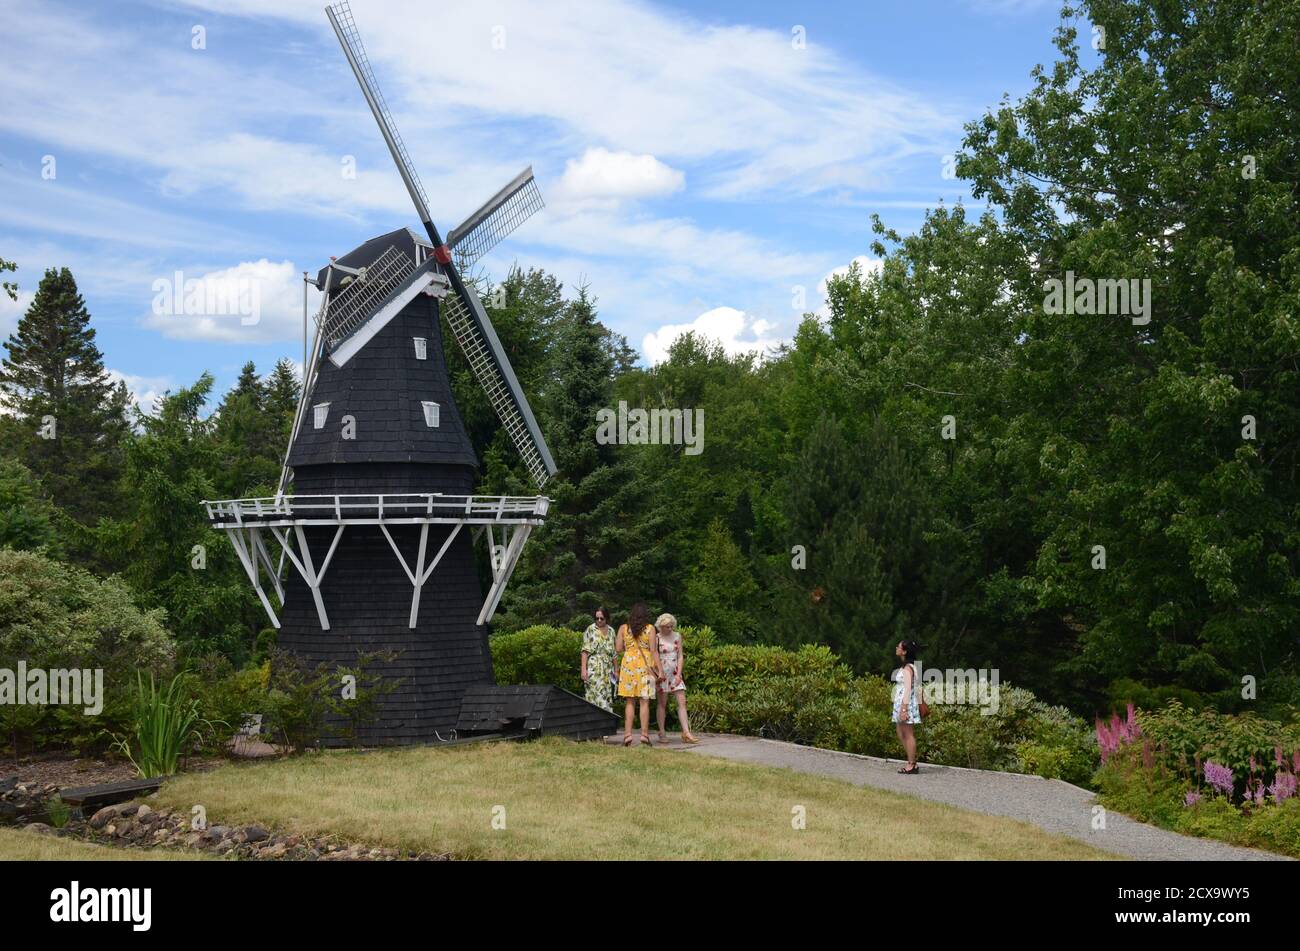 The windmill at Kingsbrae Gardens, St Andrews Stock Photo